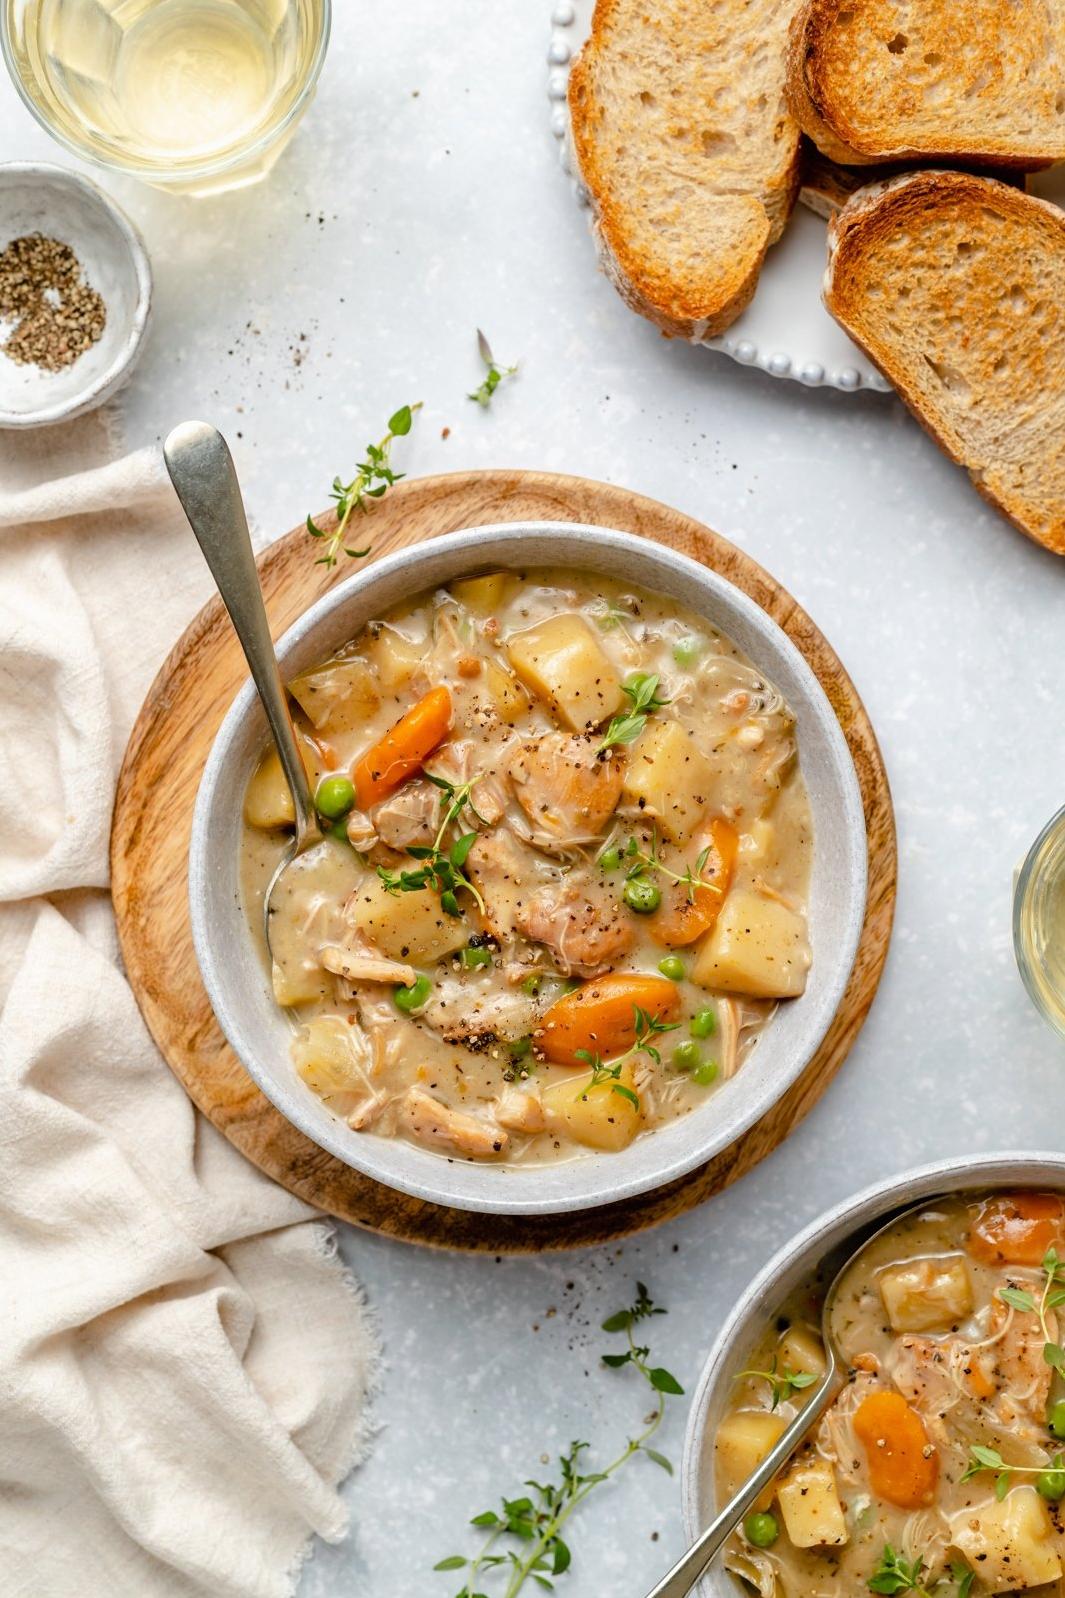  The perfect blend of white wine and chicken stew leaves a zesty taste in the mouth